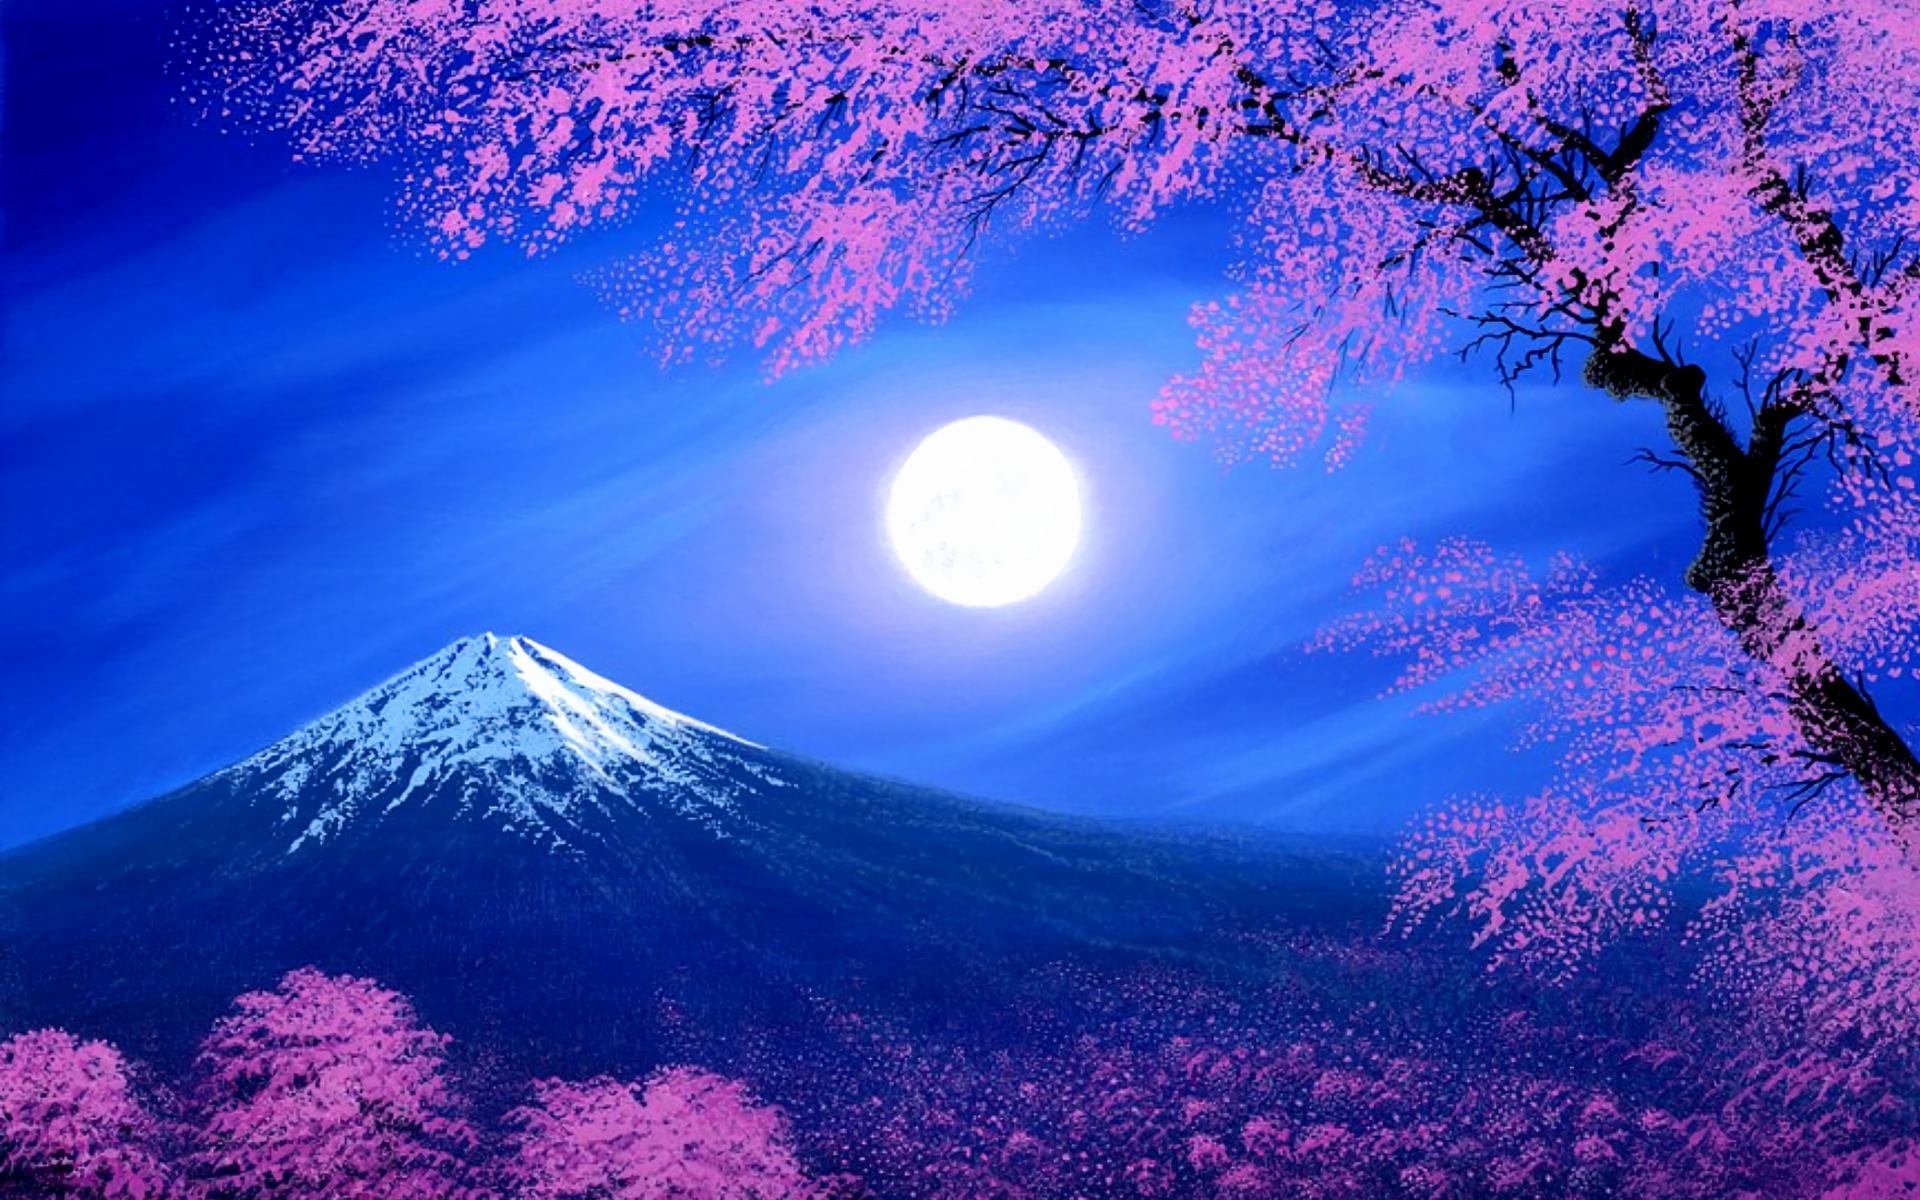 Hd Wallpaper Cherry Blossom Painting Mountain 1349235 Hd Wallpaper Backgrounds Download